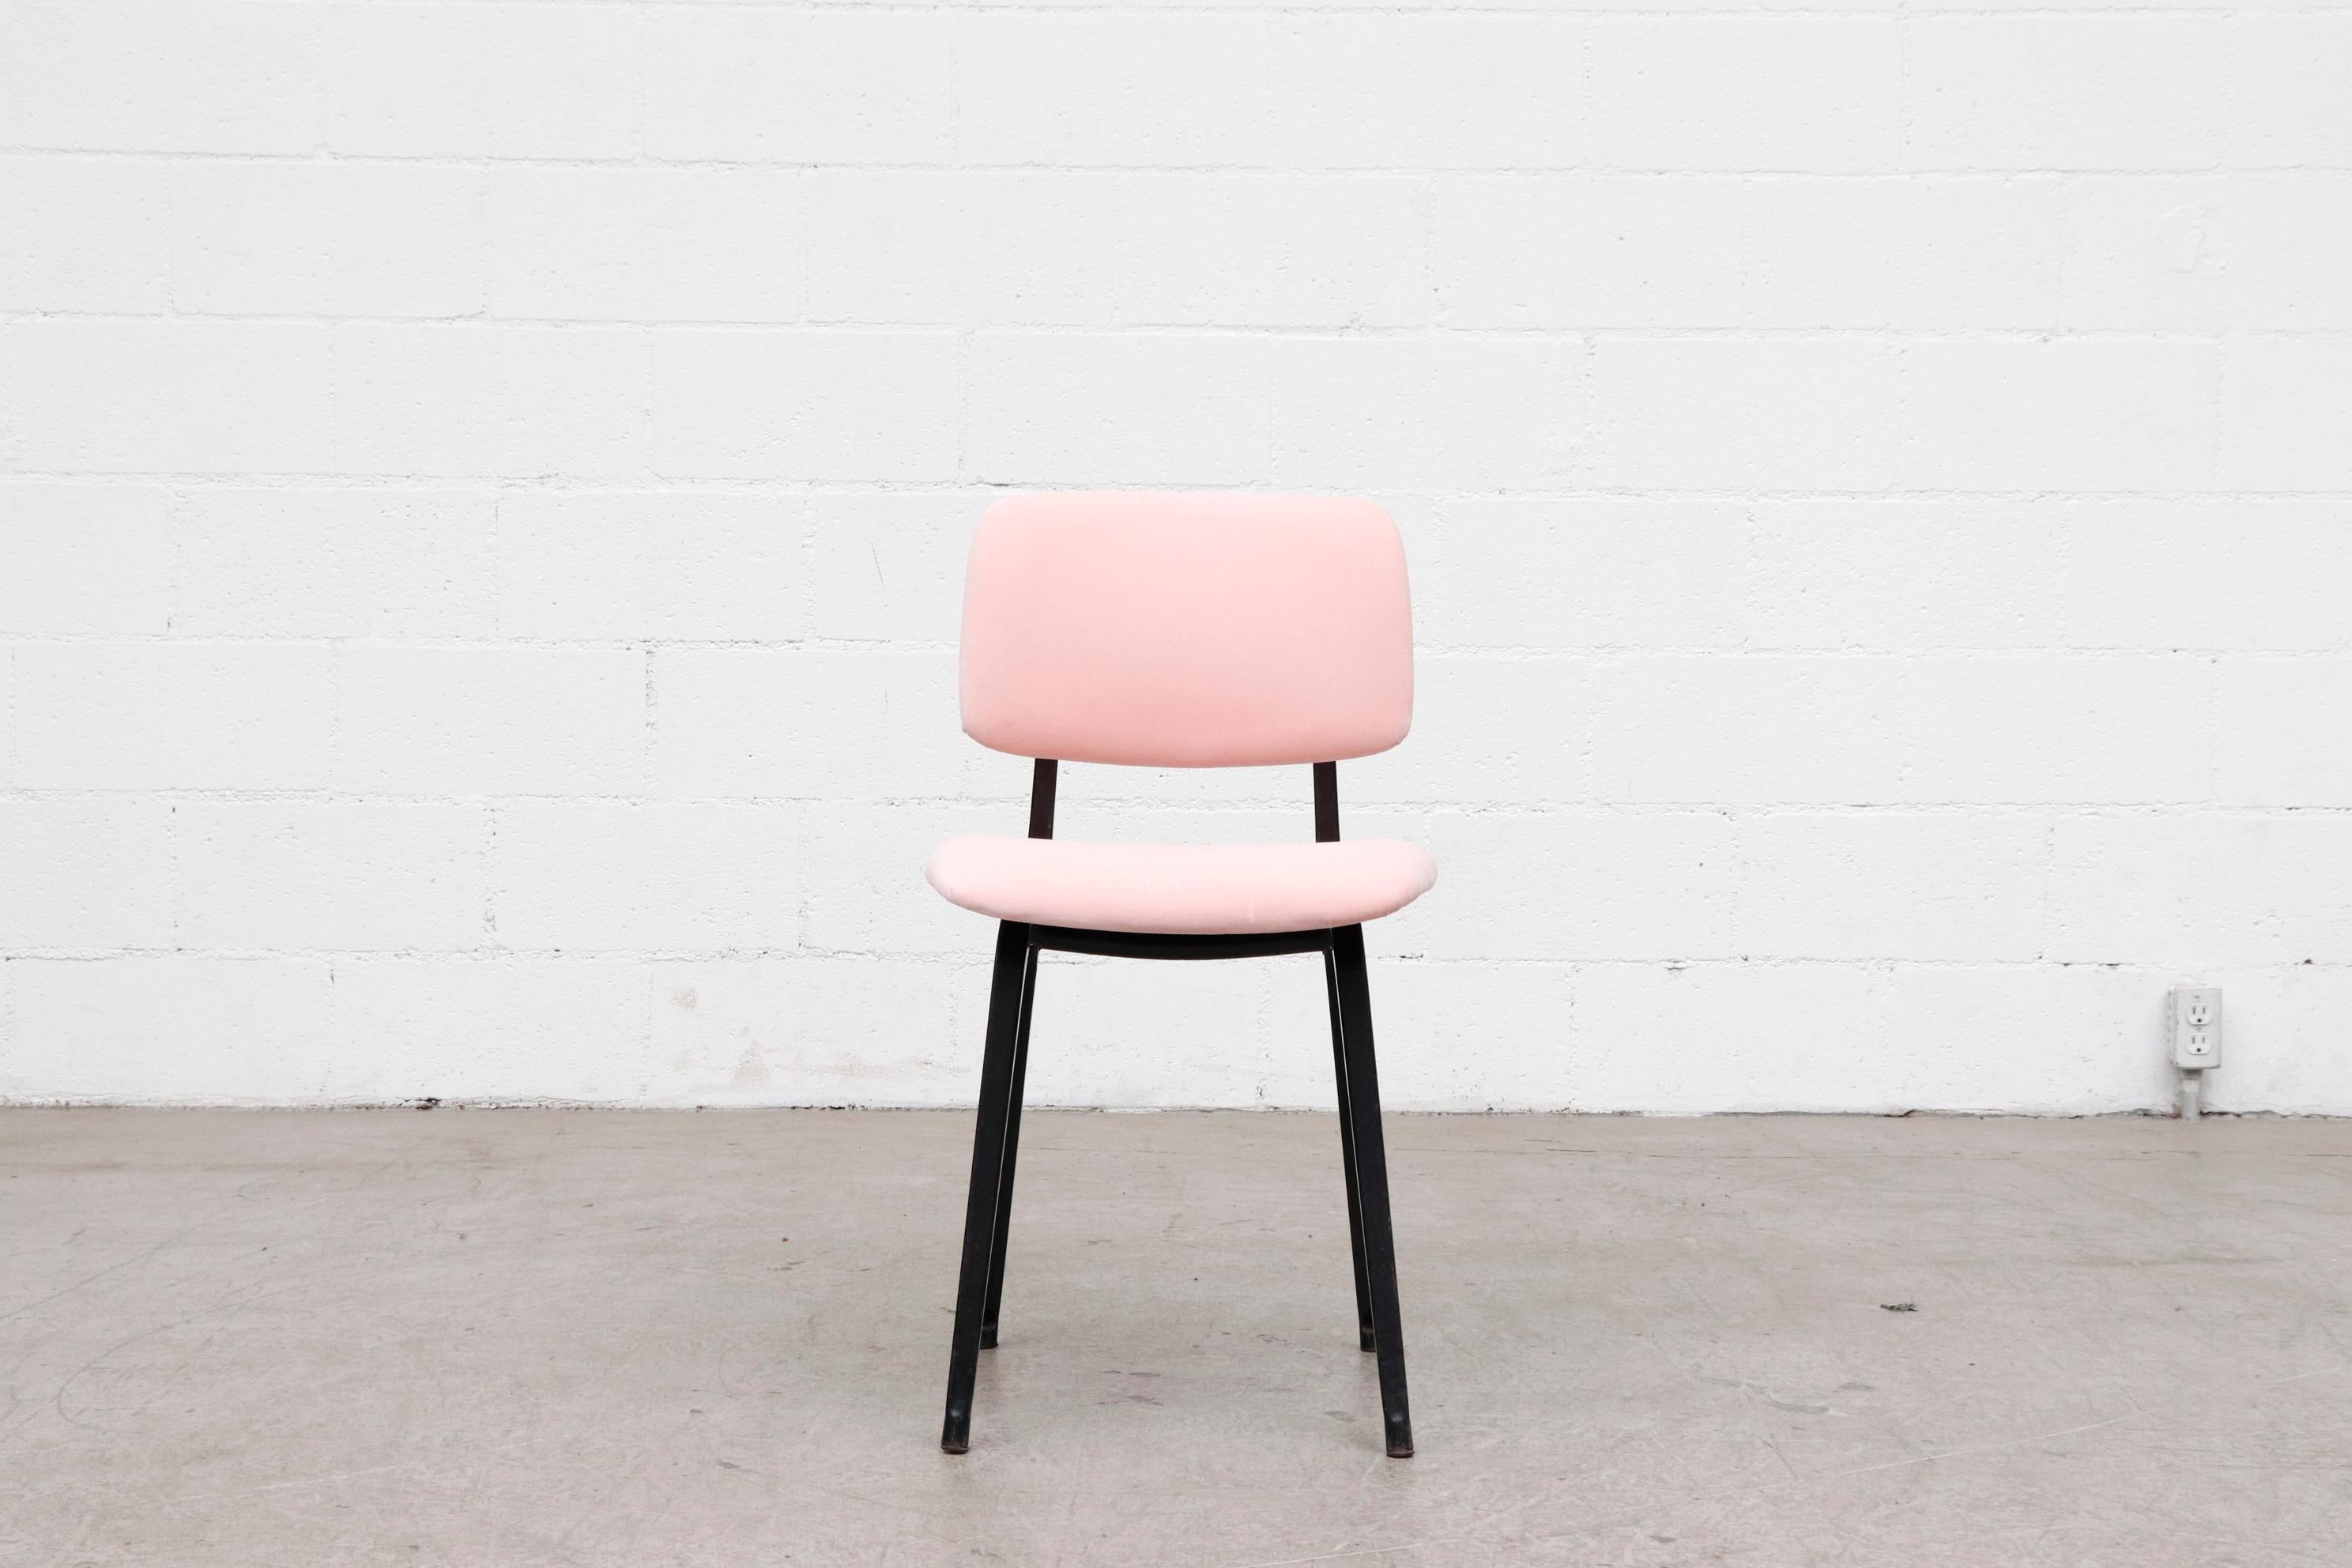 Newly Upholstered Pink Velvet Friso Kramer 'Revolt' Chair with Black Enameled Metal Frame. Classic Design with Youthful Pop! Frame in Original Condition with Wear Consistent with its Age and Use. Matching 'Revolt' Chair Also Available with Grey